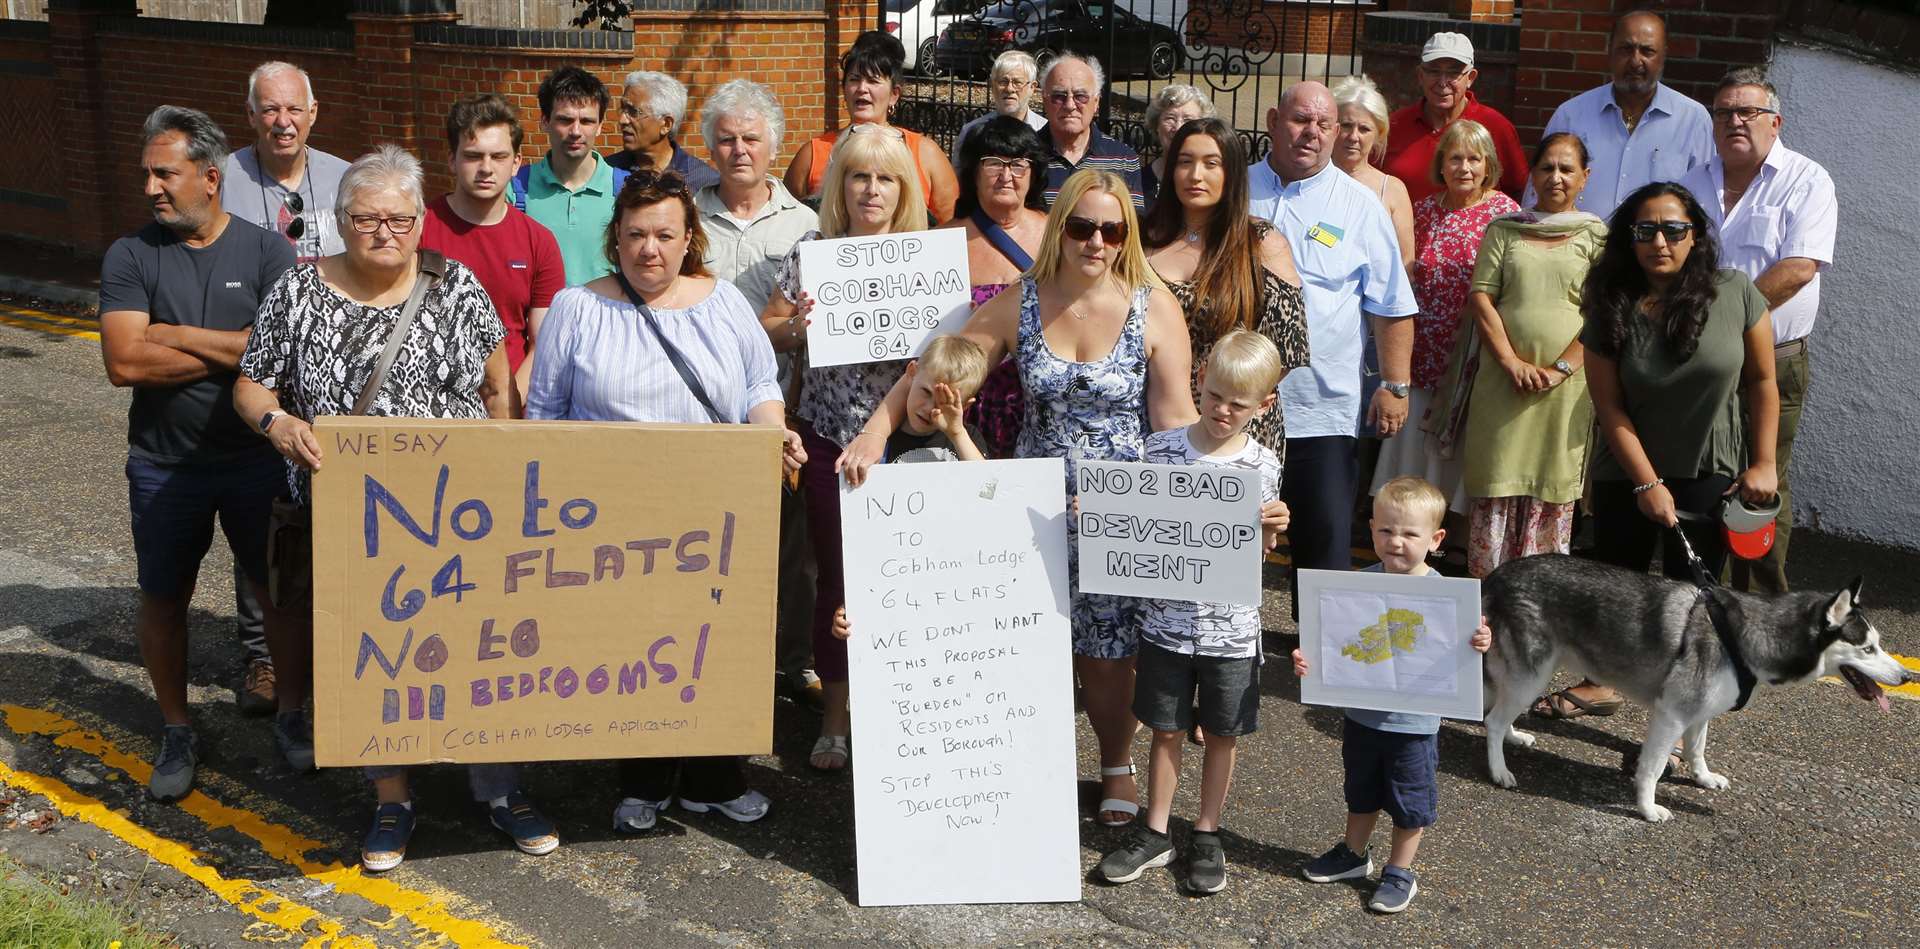 Angry residents protesting about planning at Cobham Lodge next to Nell's Cafe, Marling Cross, Watling St, Gravesend. Picture: Andy Jones. (15967930)